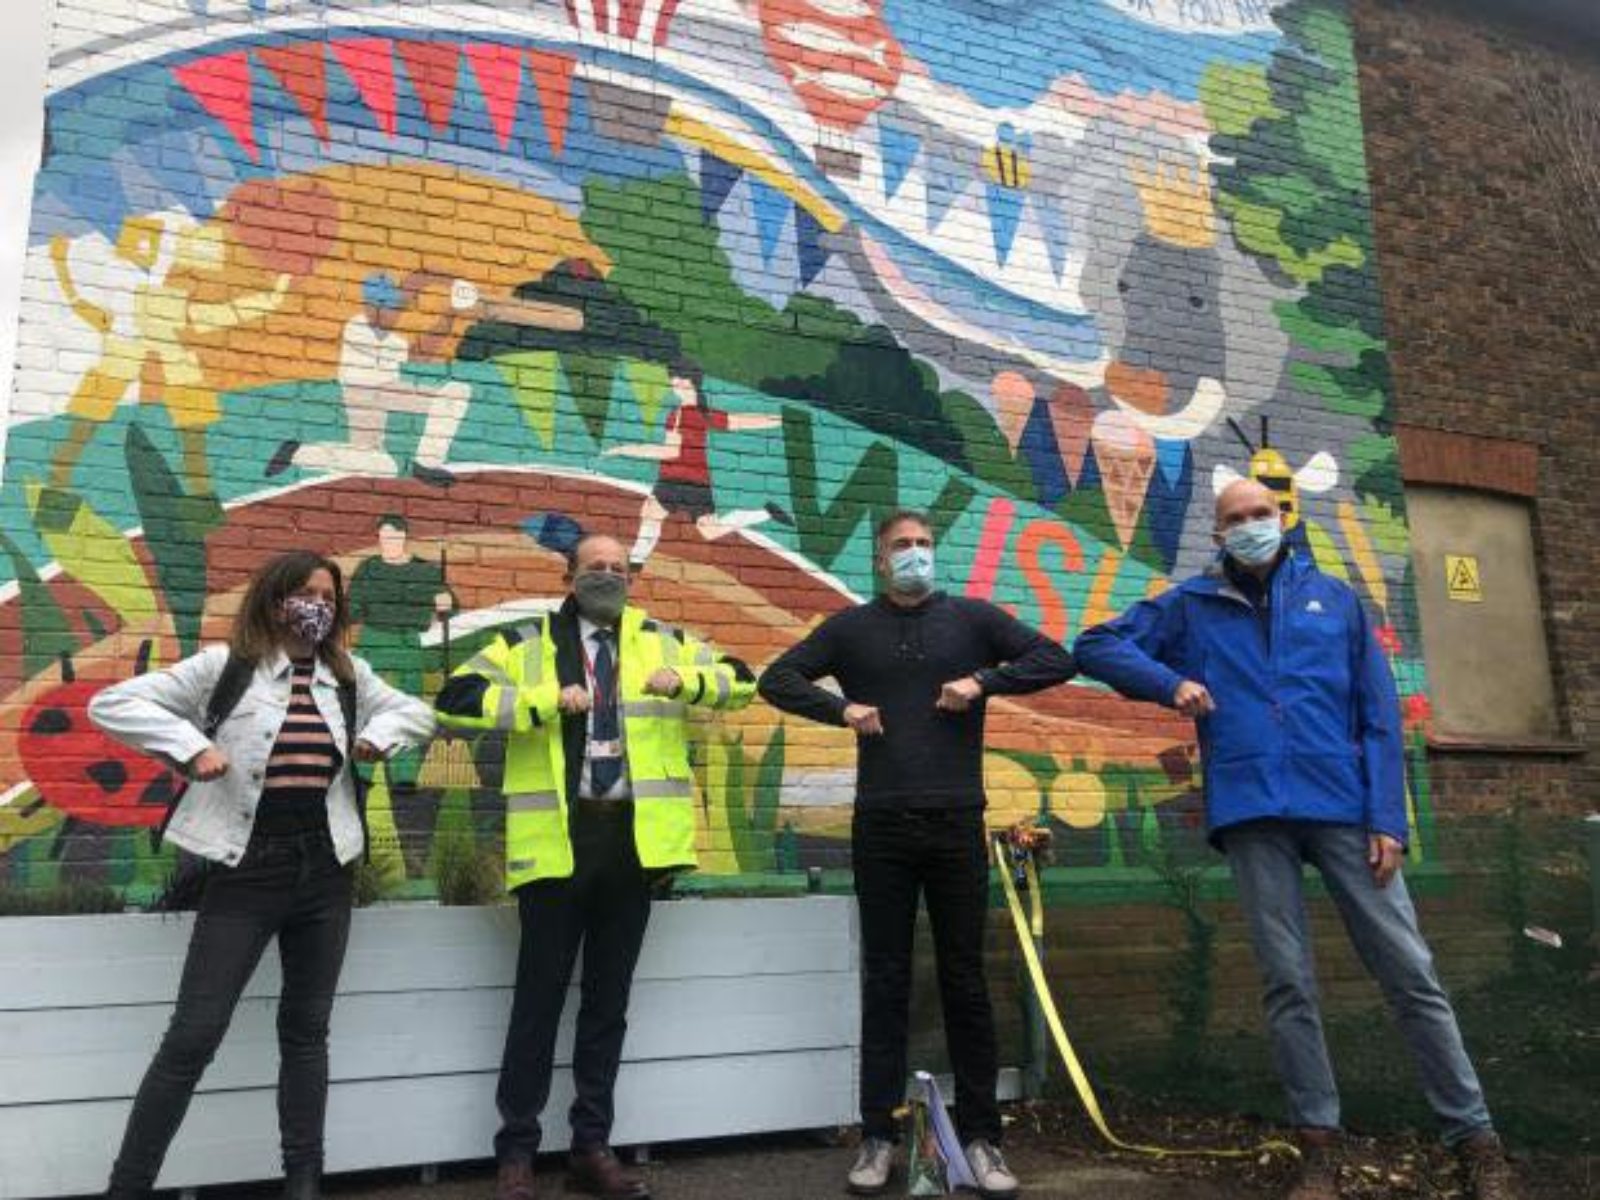 Peter Kyle and Wish Park representatives in front of a colourful mural located at Wish Park.